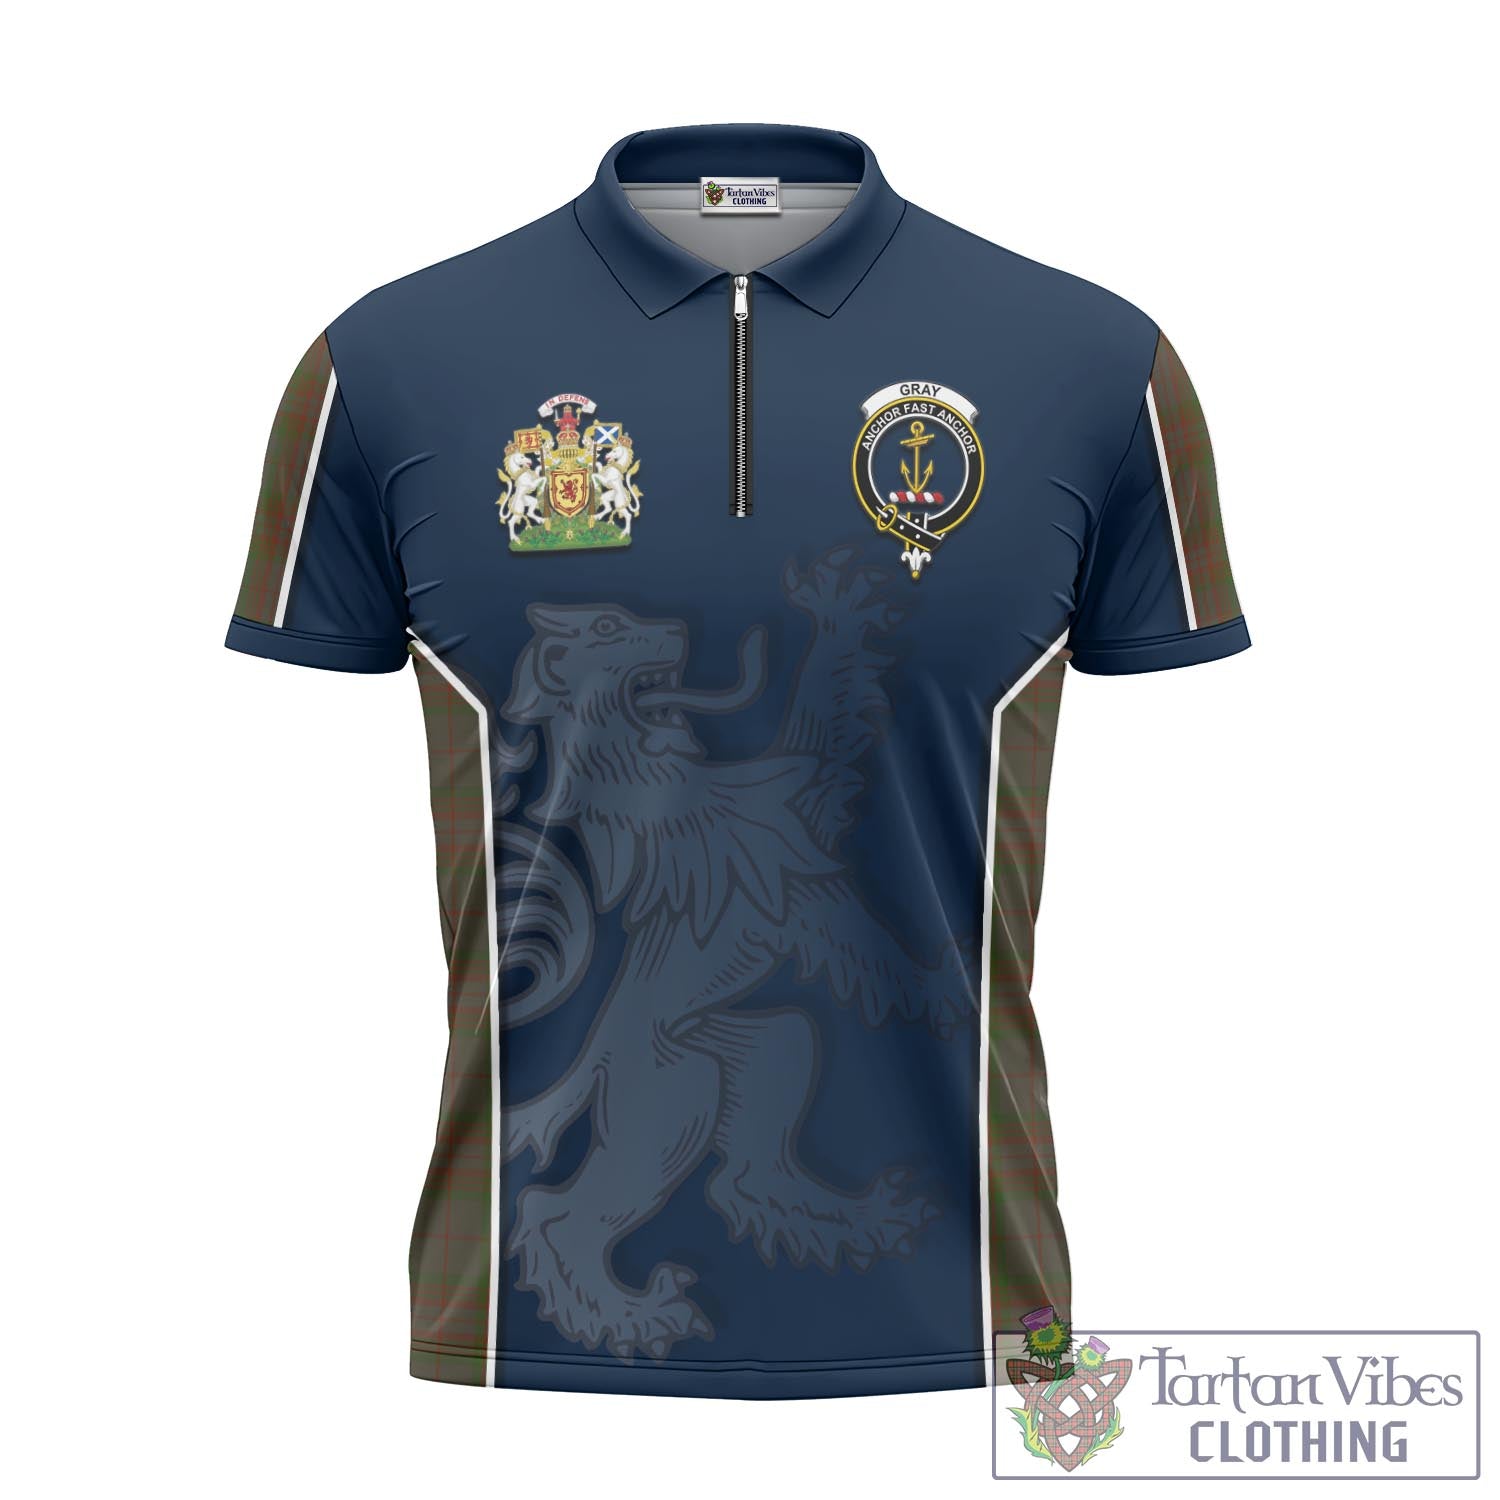 Tartan Vibes Clothing Gray Tartan Zipper Polo Shirt with Family Crest and Lion Rampant Vibes Sport Style